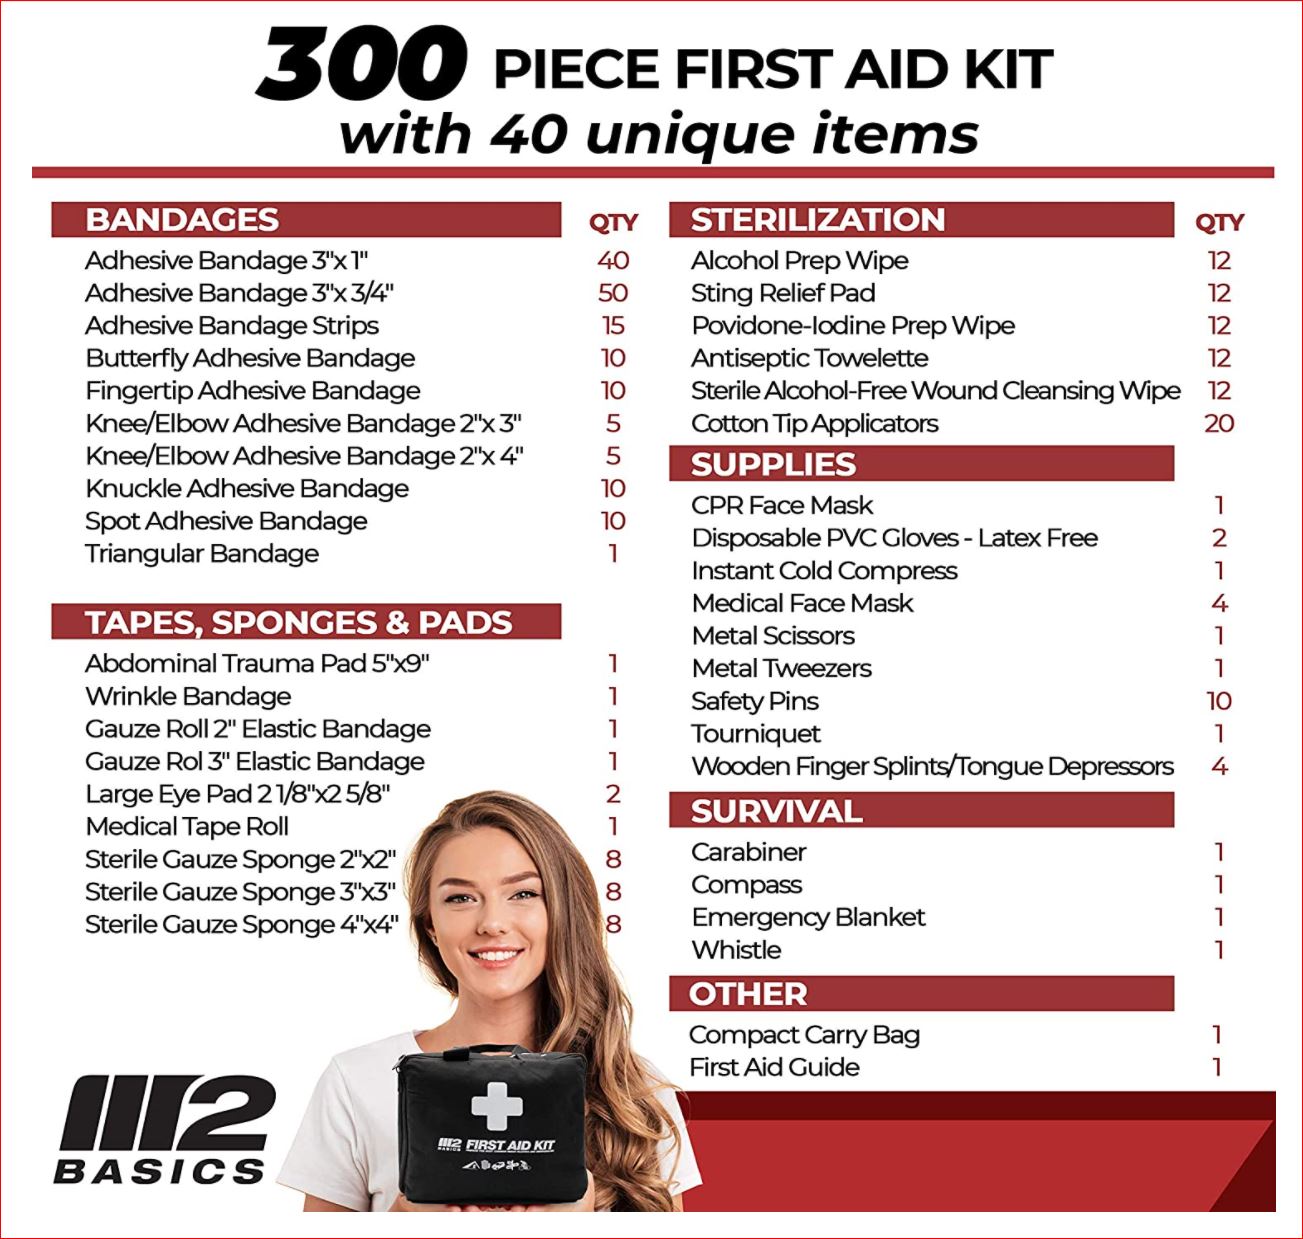 A list of items in the M2 Basics kit